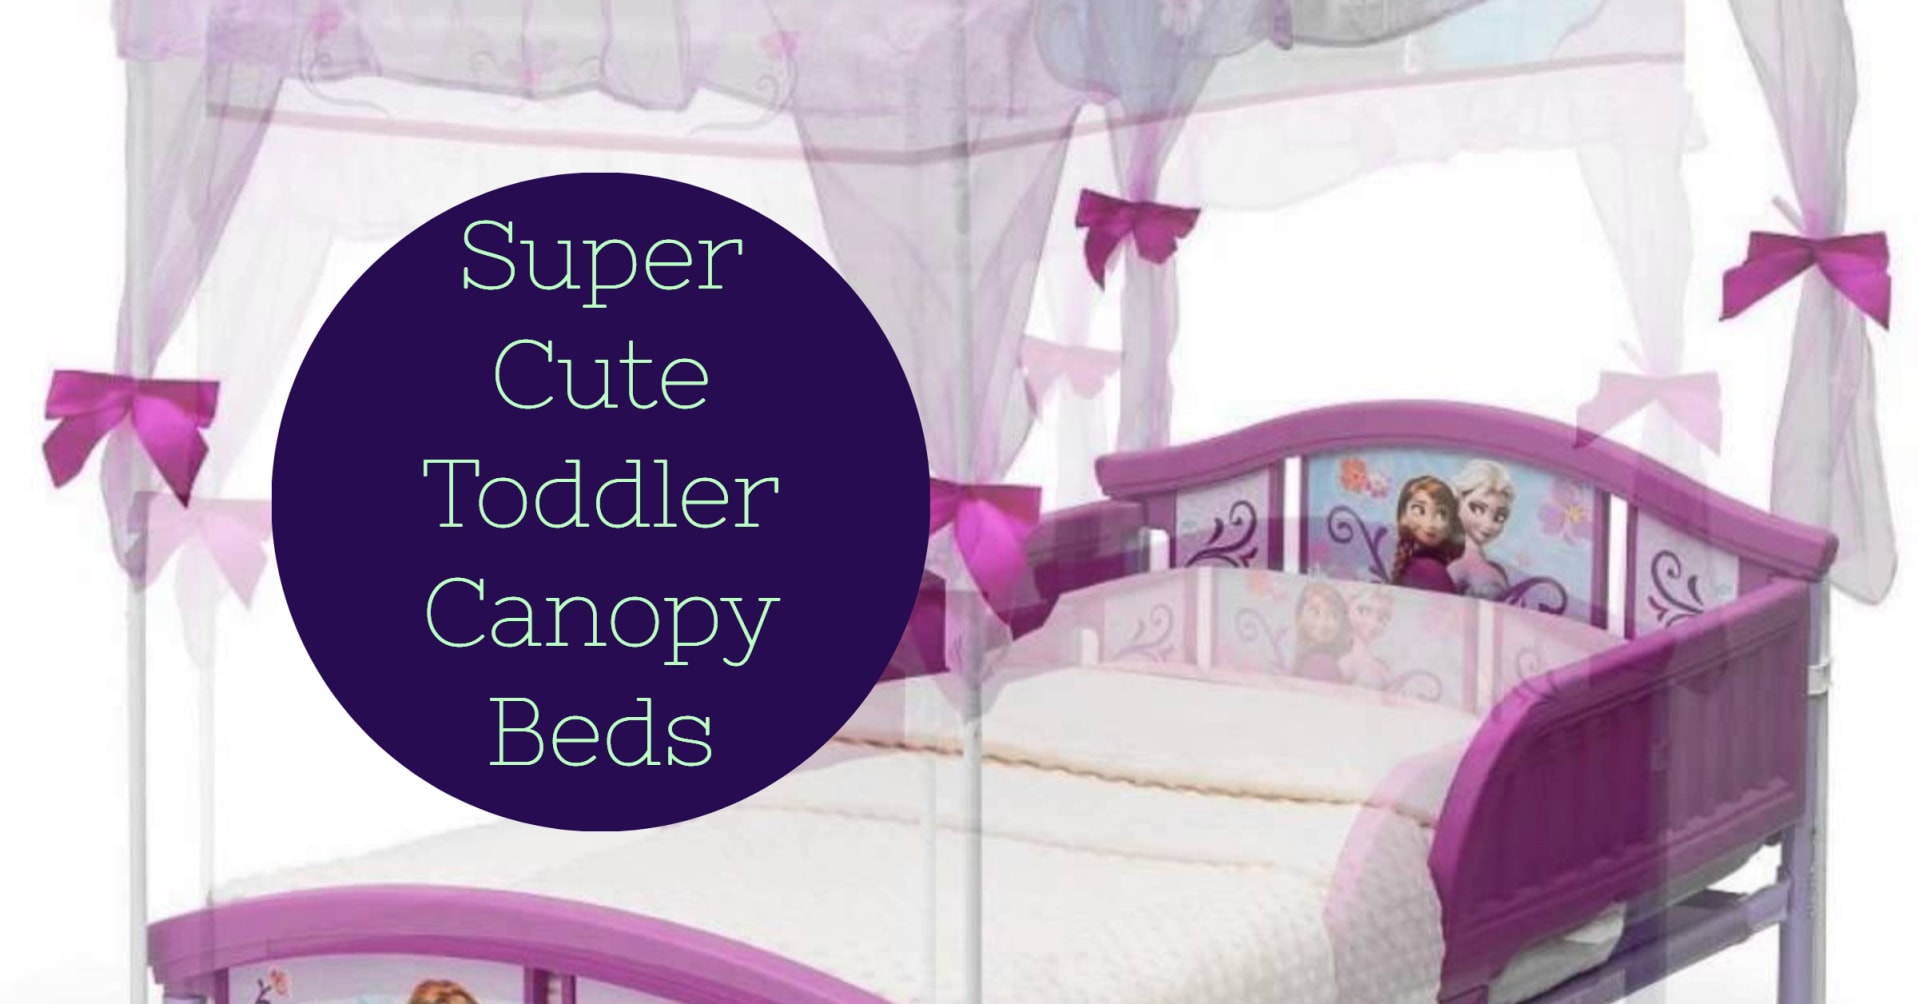 cute beds for girls